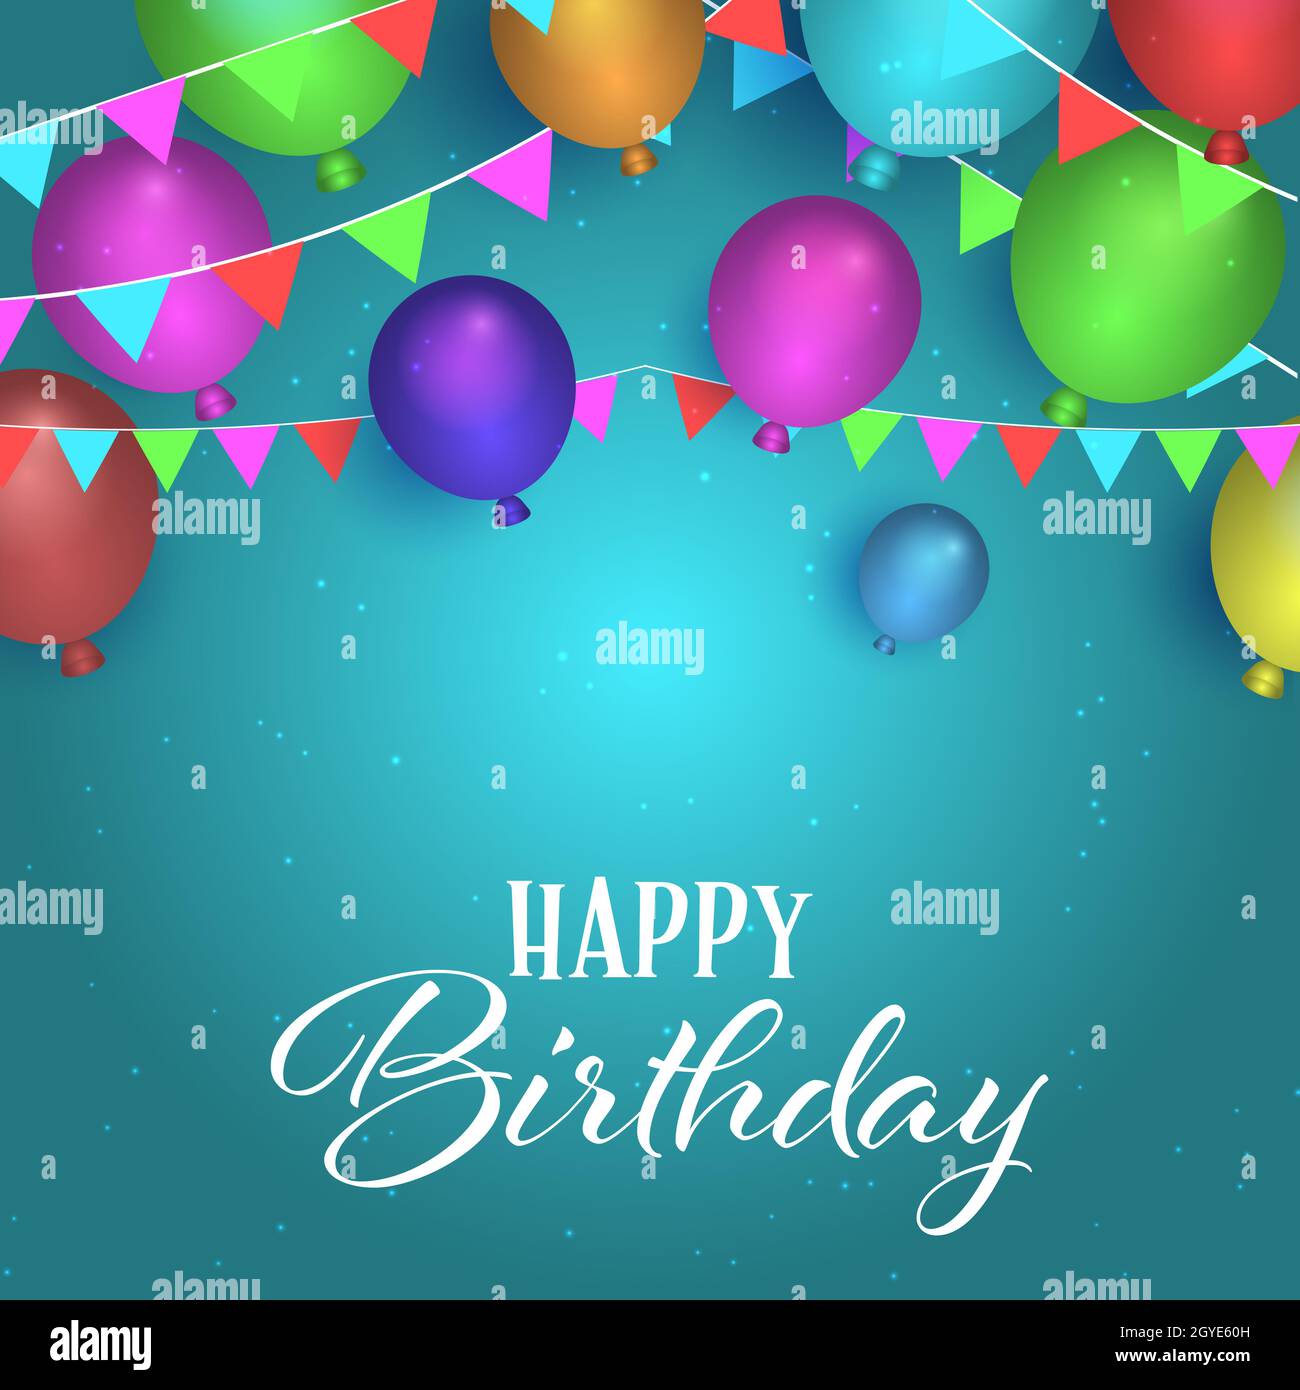 Birthday background with balloons and bunting design Stock Photo - Alamy